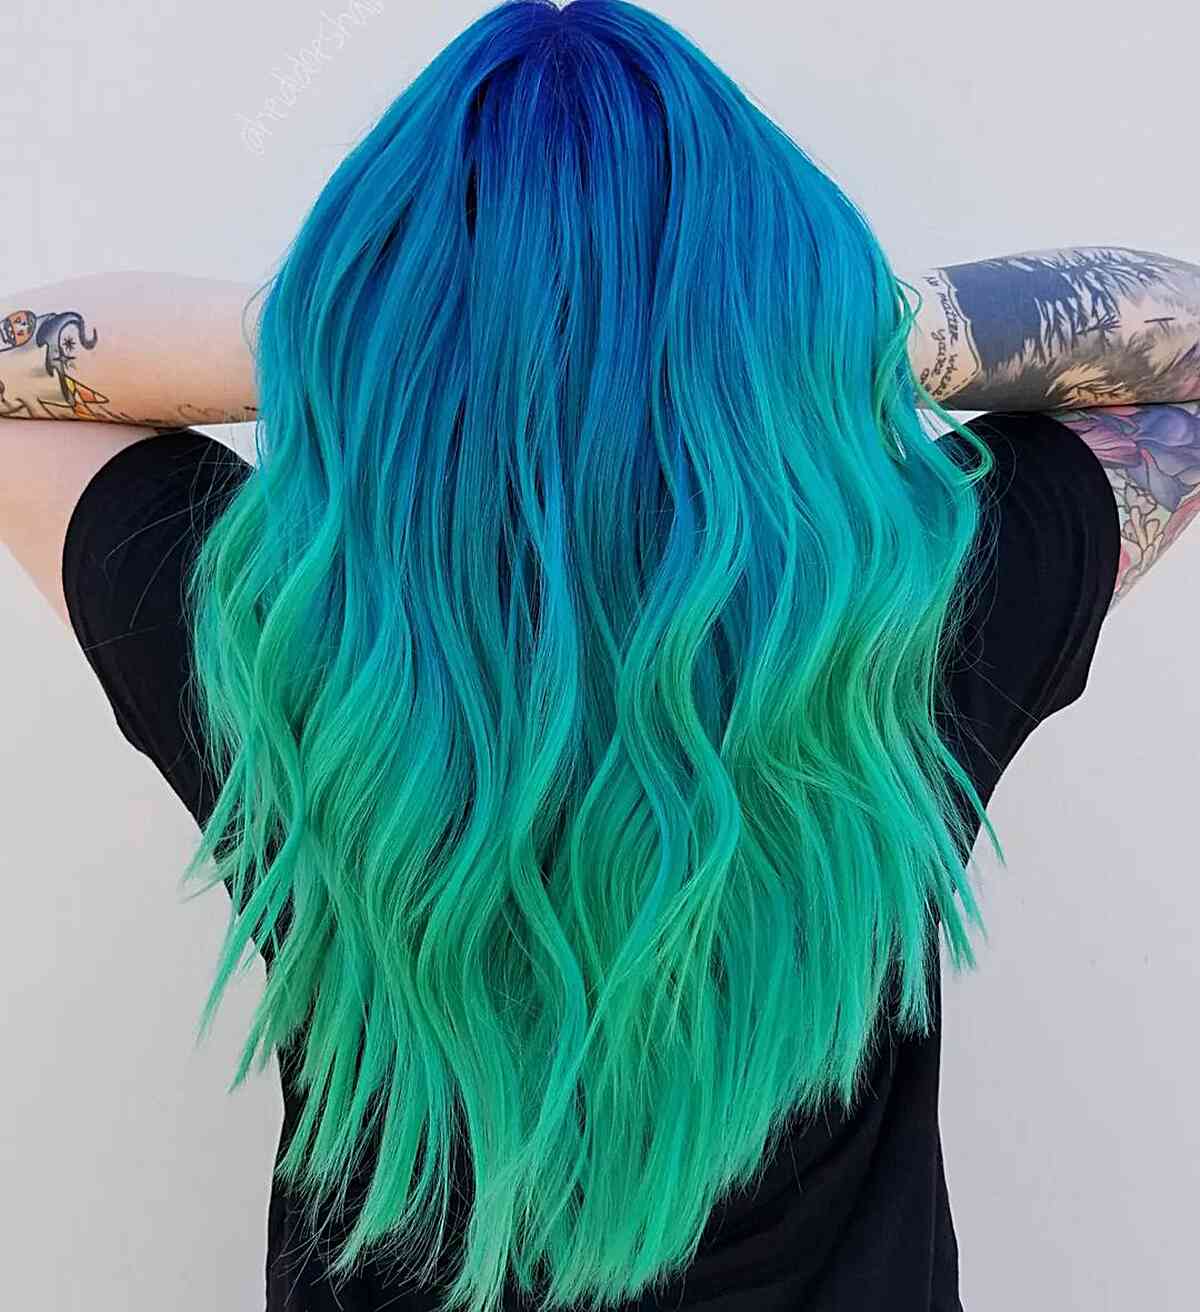 Blue to Green Ombre hair color